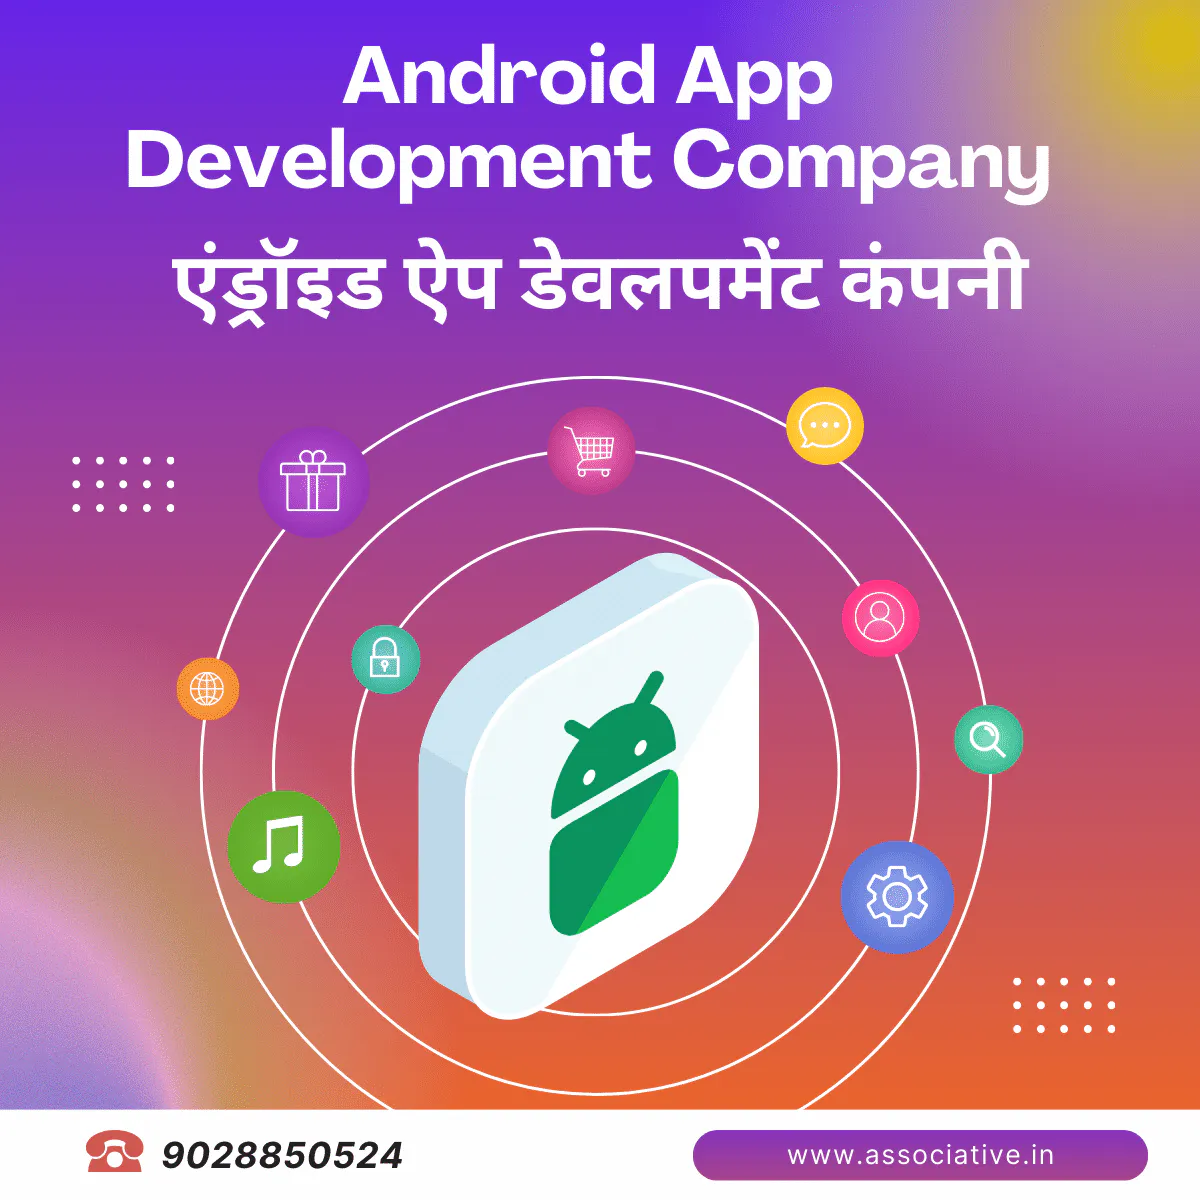 Android Mobile Application Development Services: Build Your Dream App with Associative